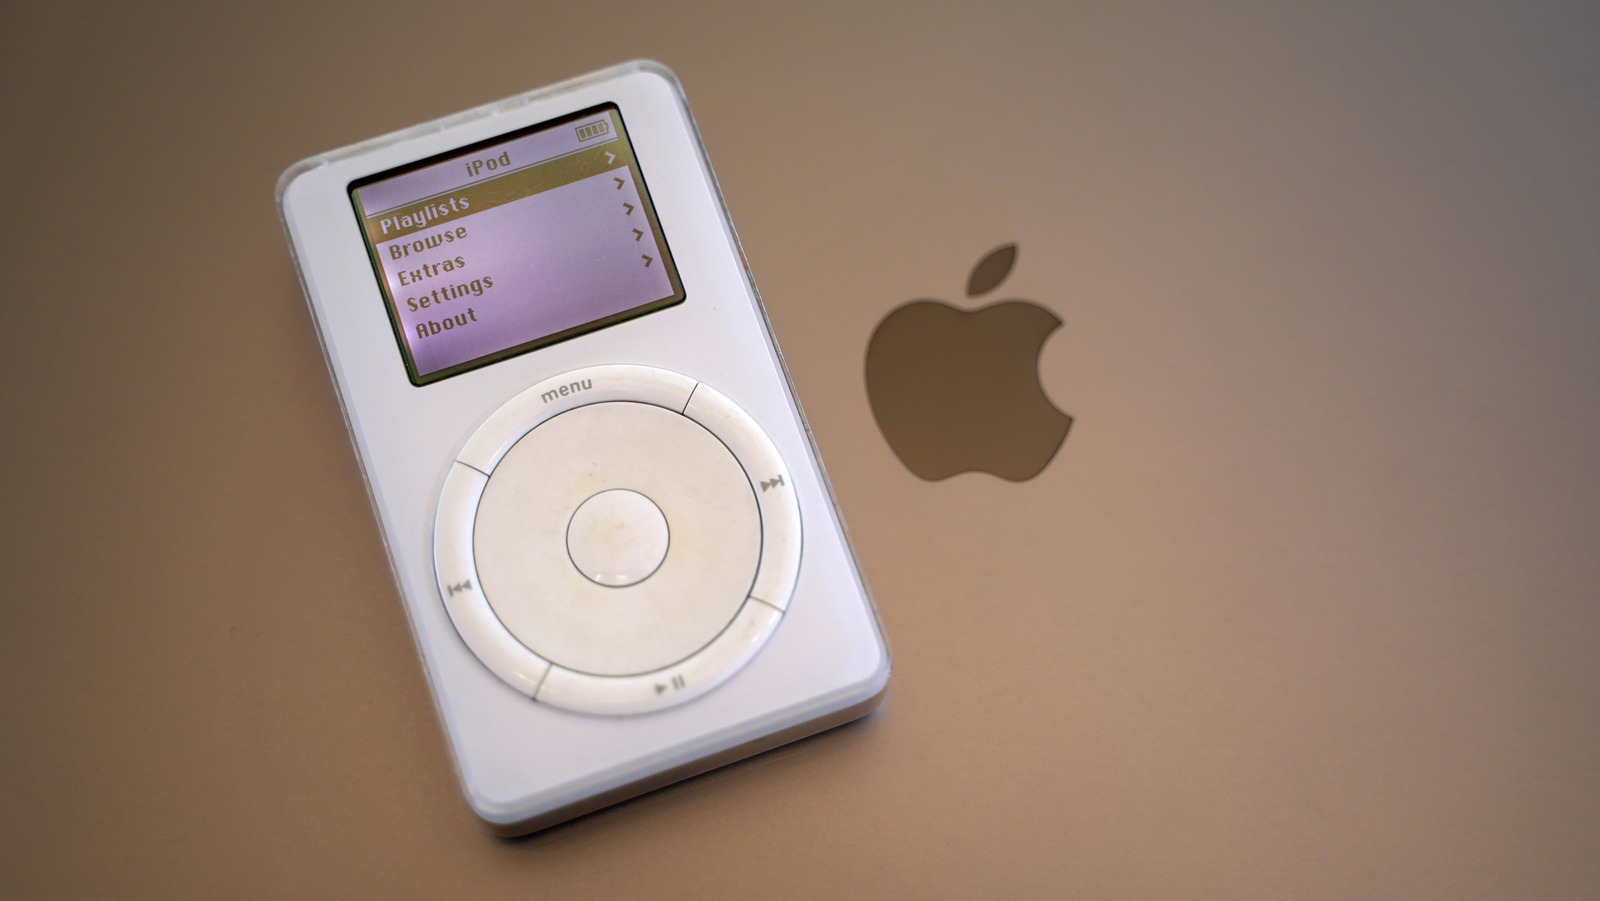 the-original-ipod-prototype-looks-a-lot-different-than-you-think